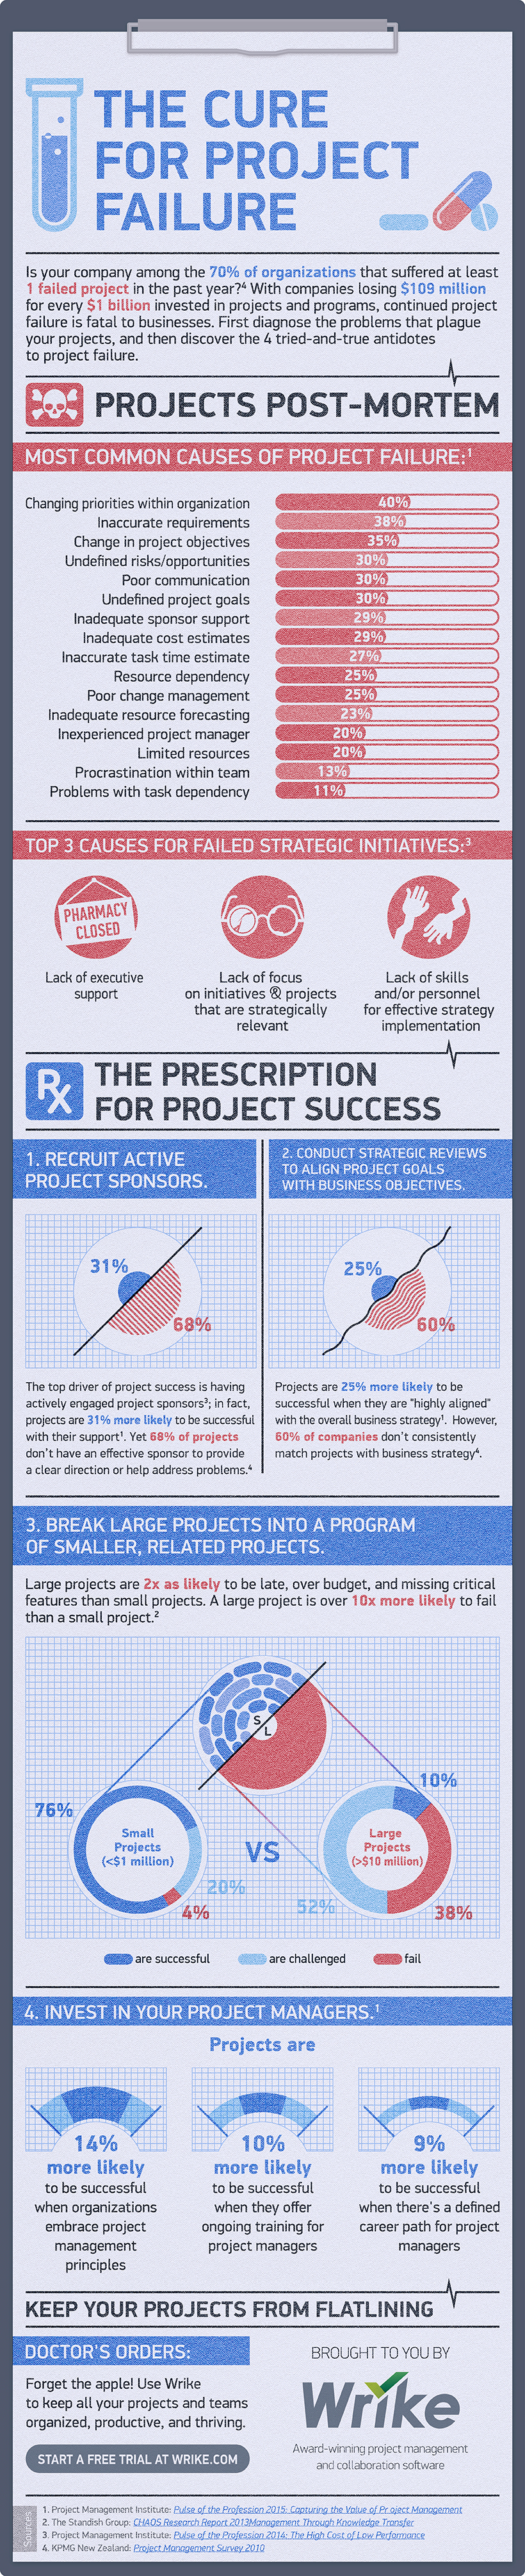 The Cure for Project Failure (Infographic)